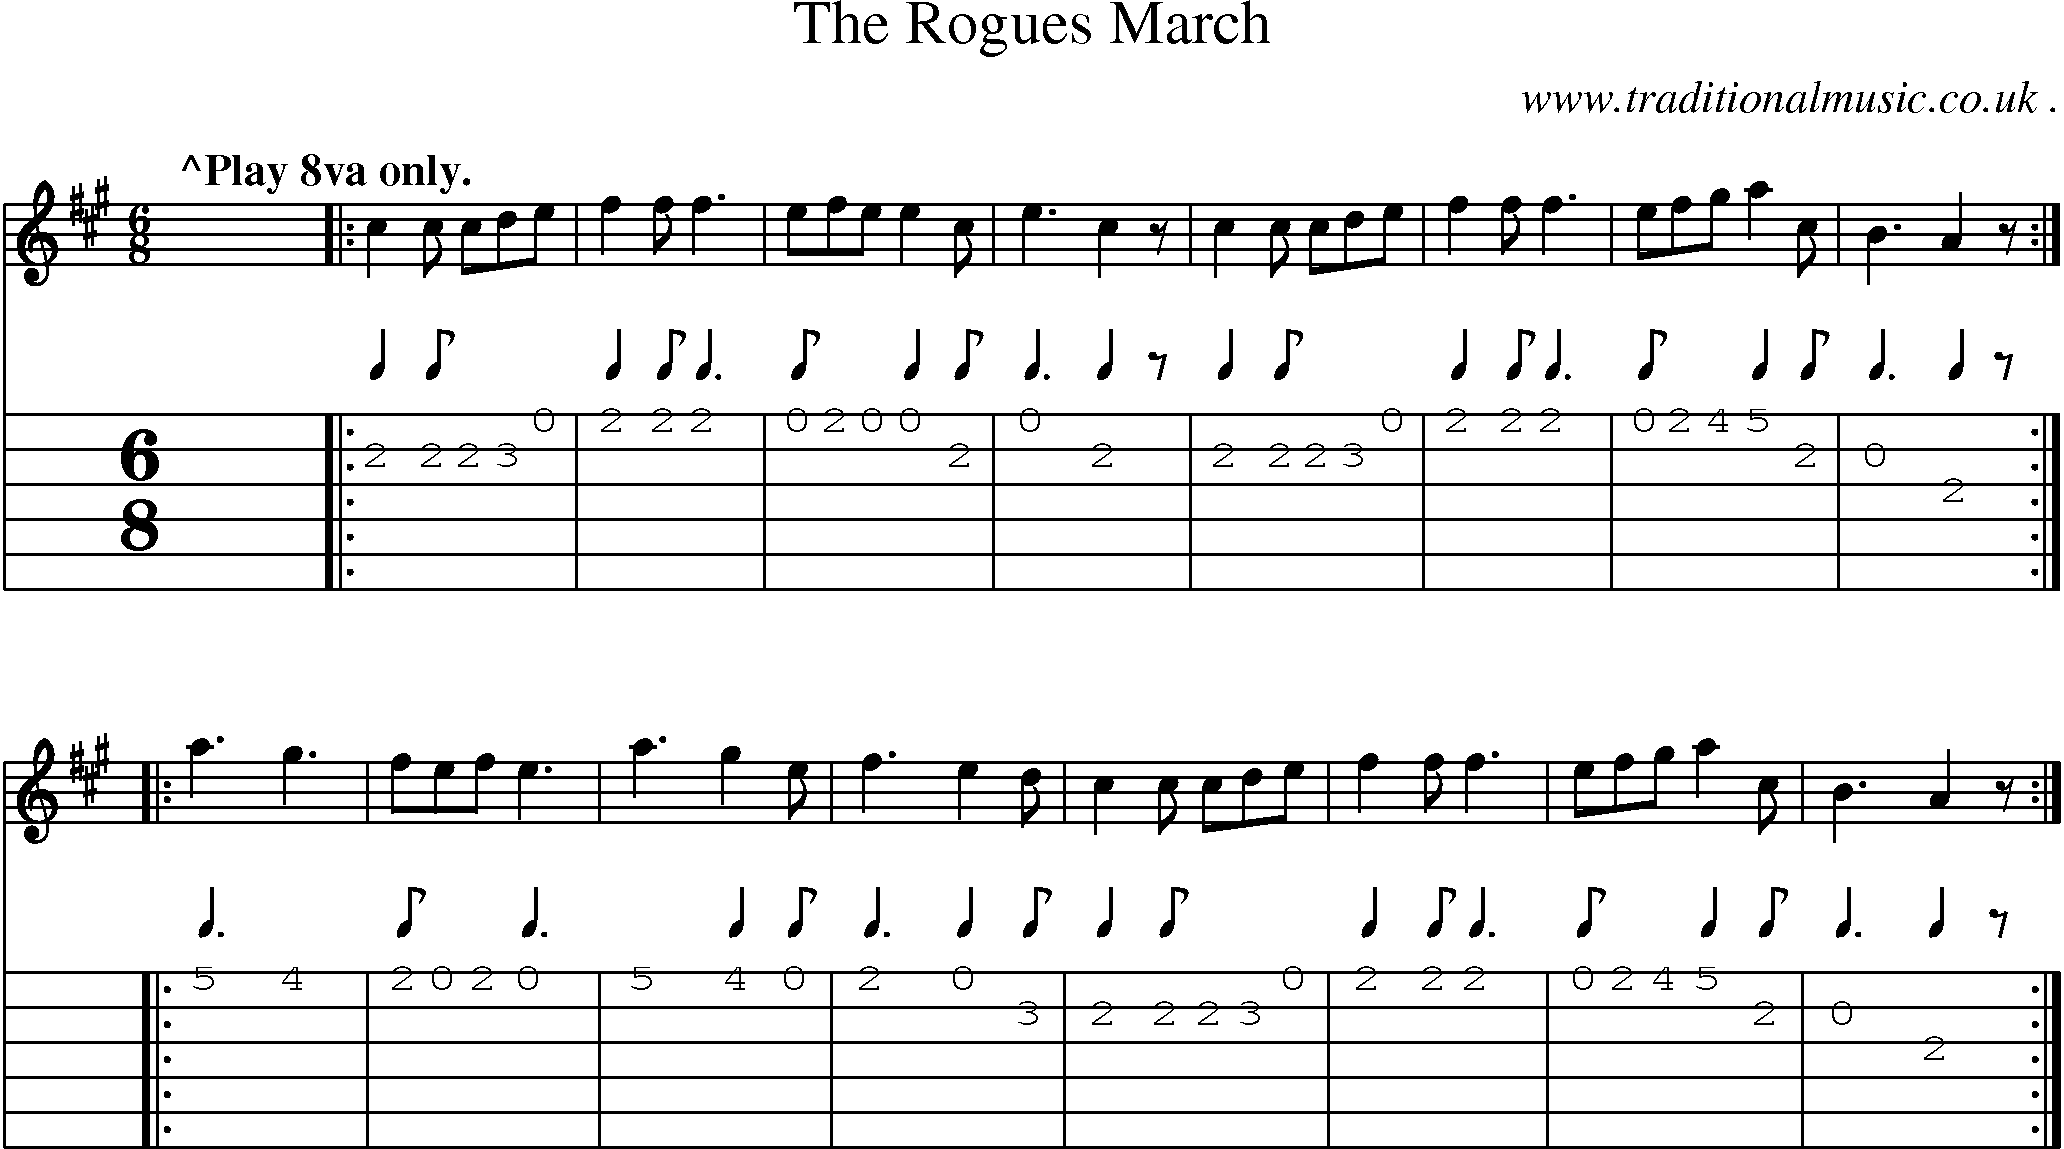 Sheet-music  score, Chords and Guitar Tabs for The Rogues March